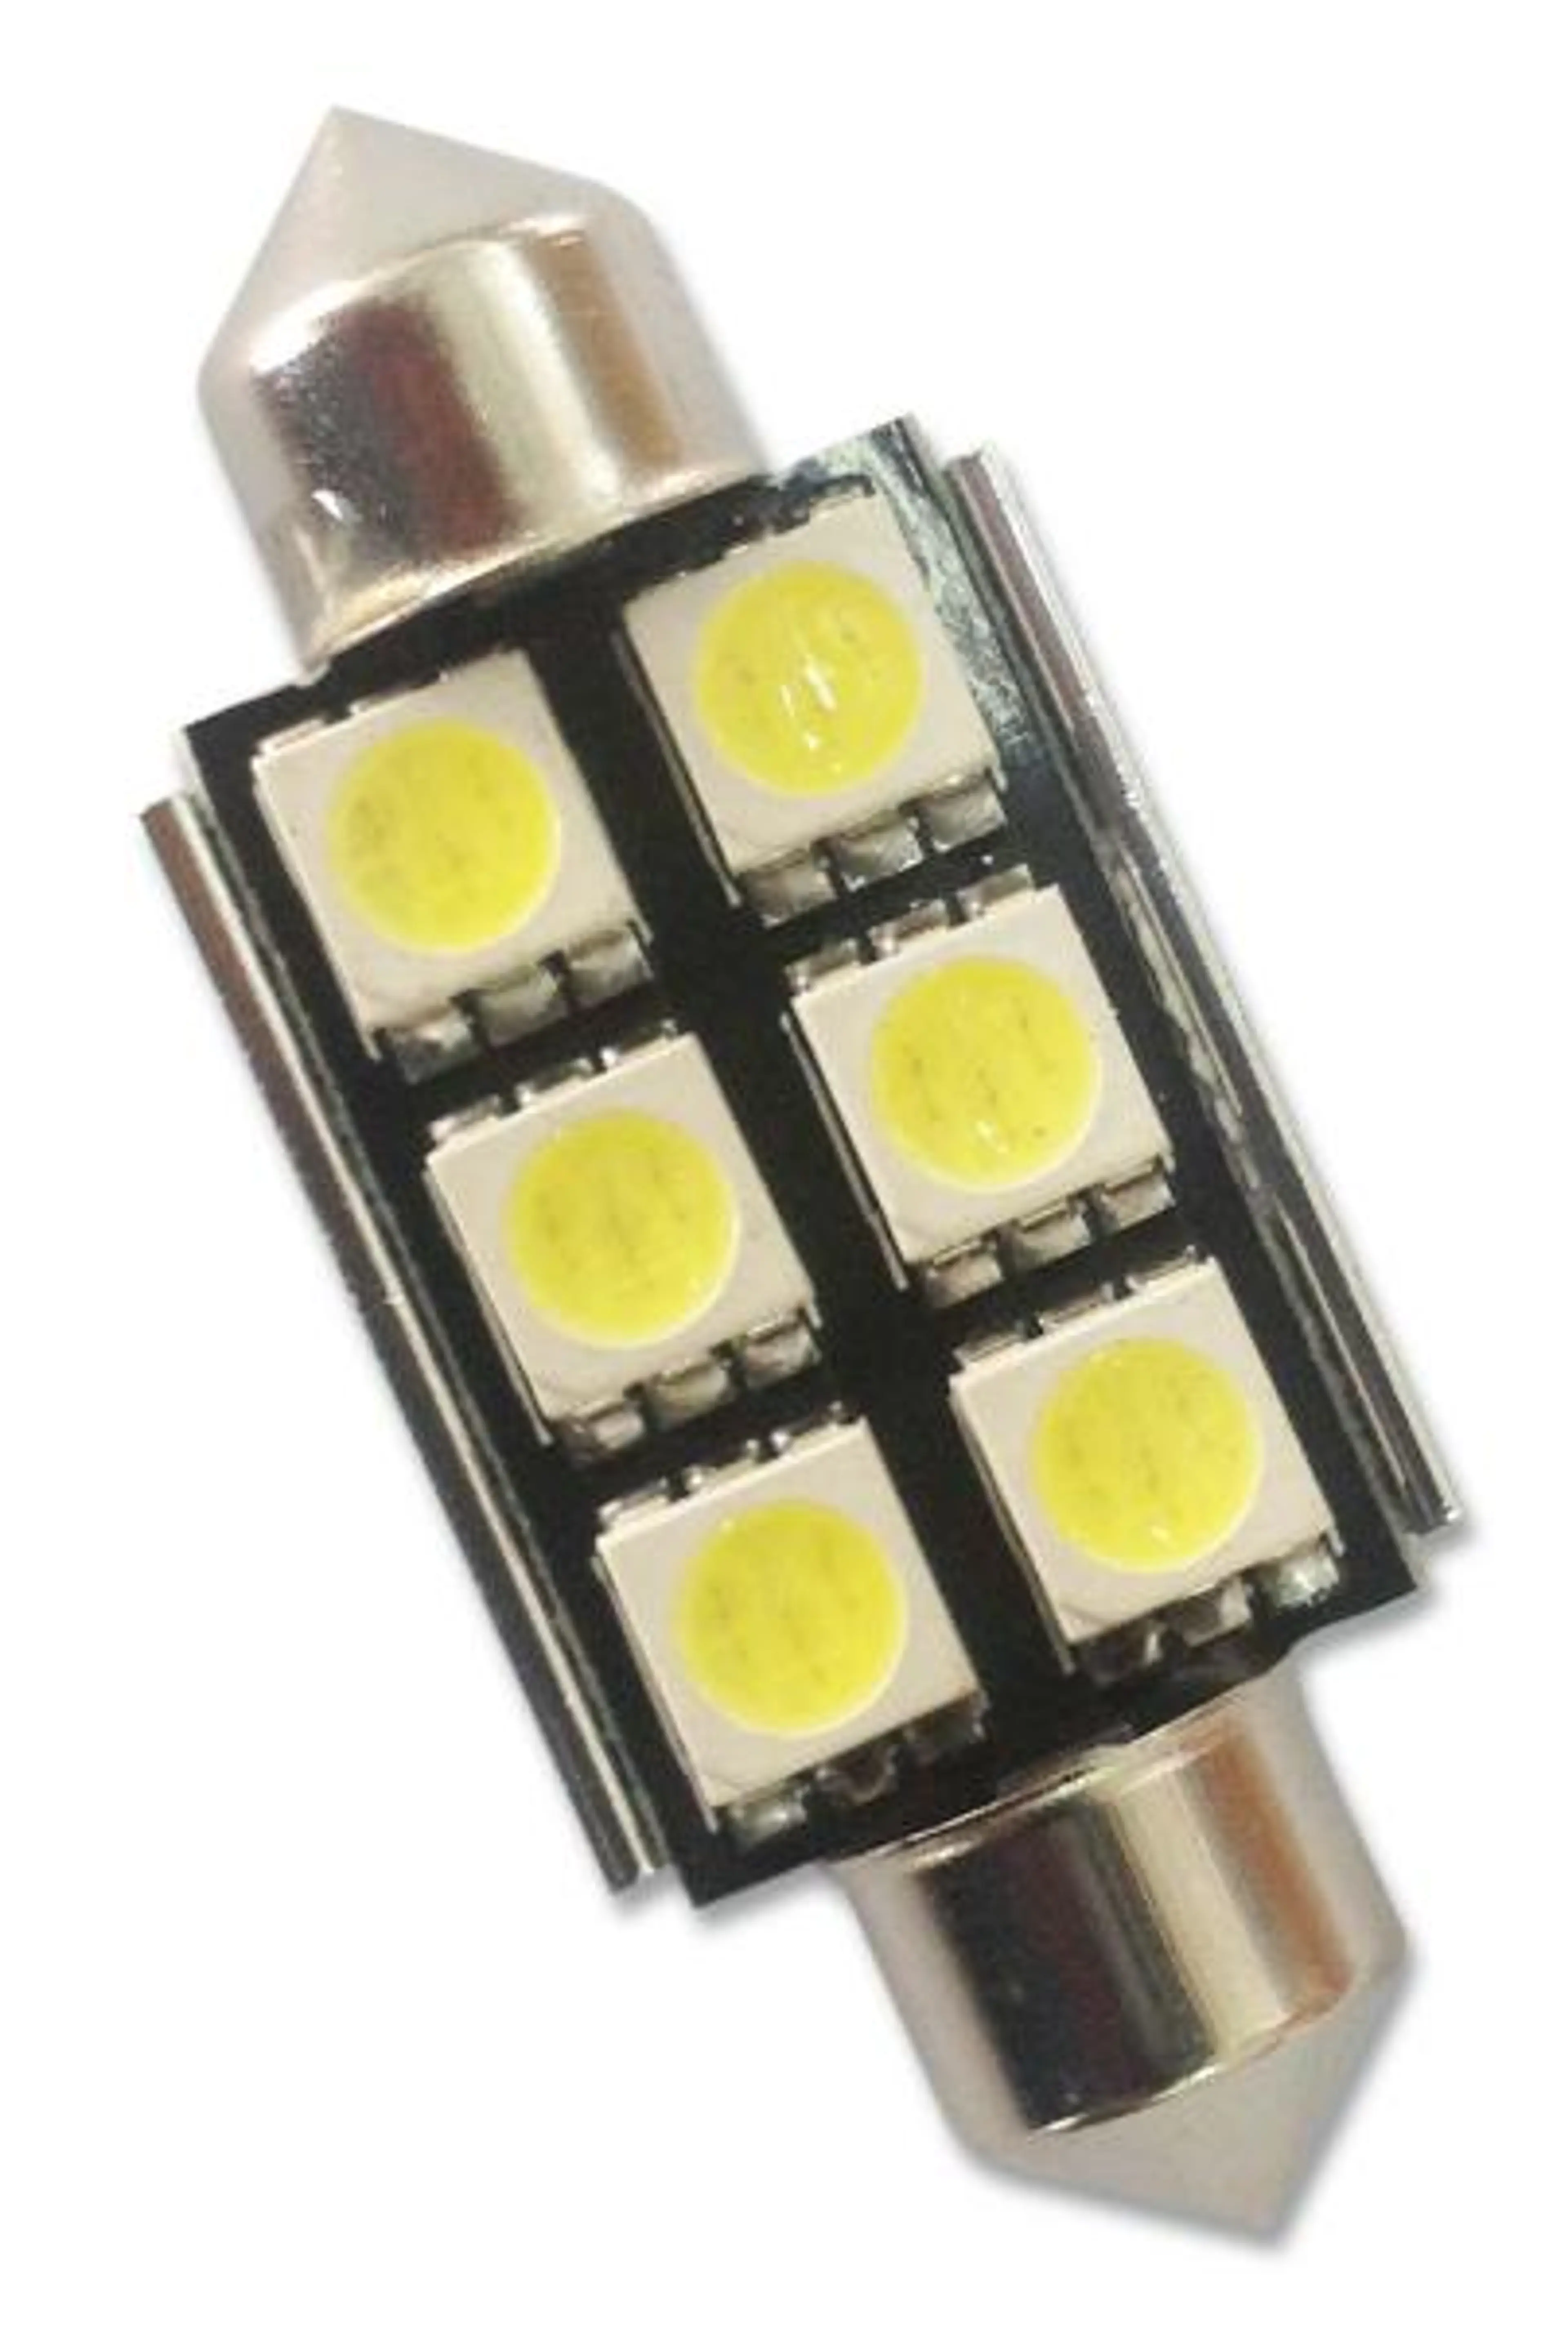 LAMPARA LED T11CANBUS 6SMD 2PZAS